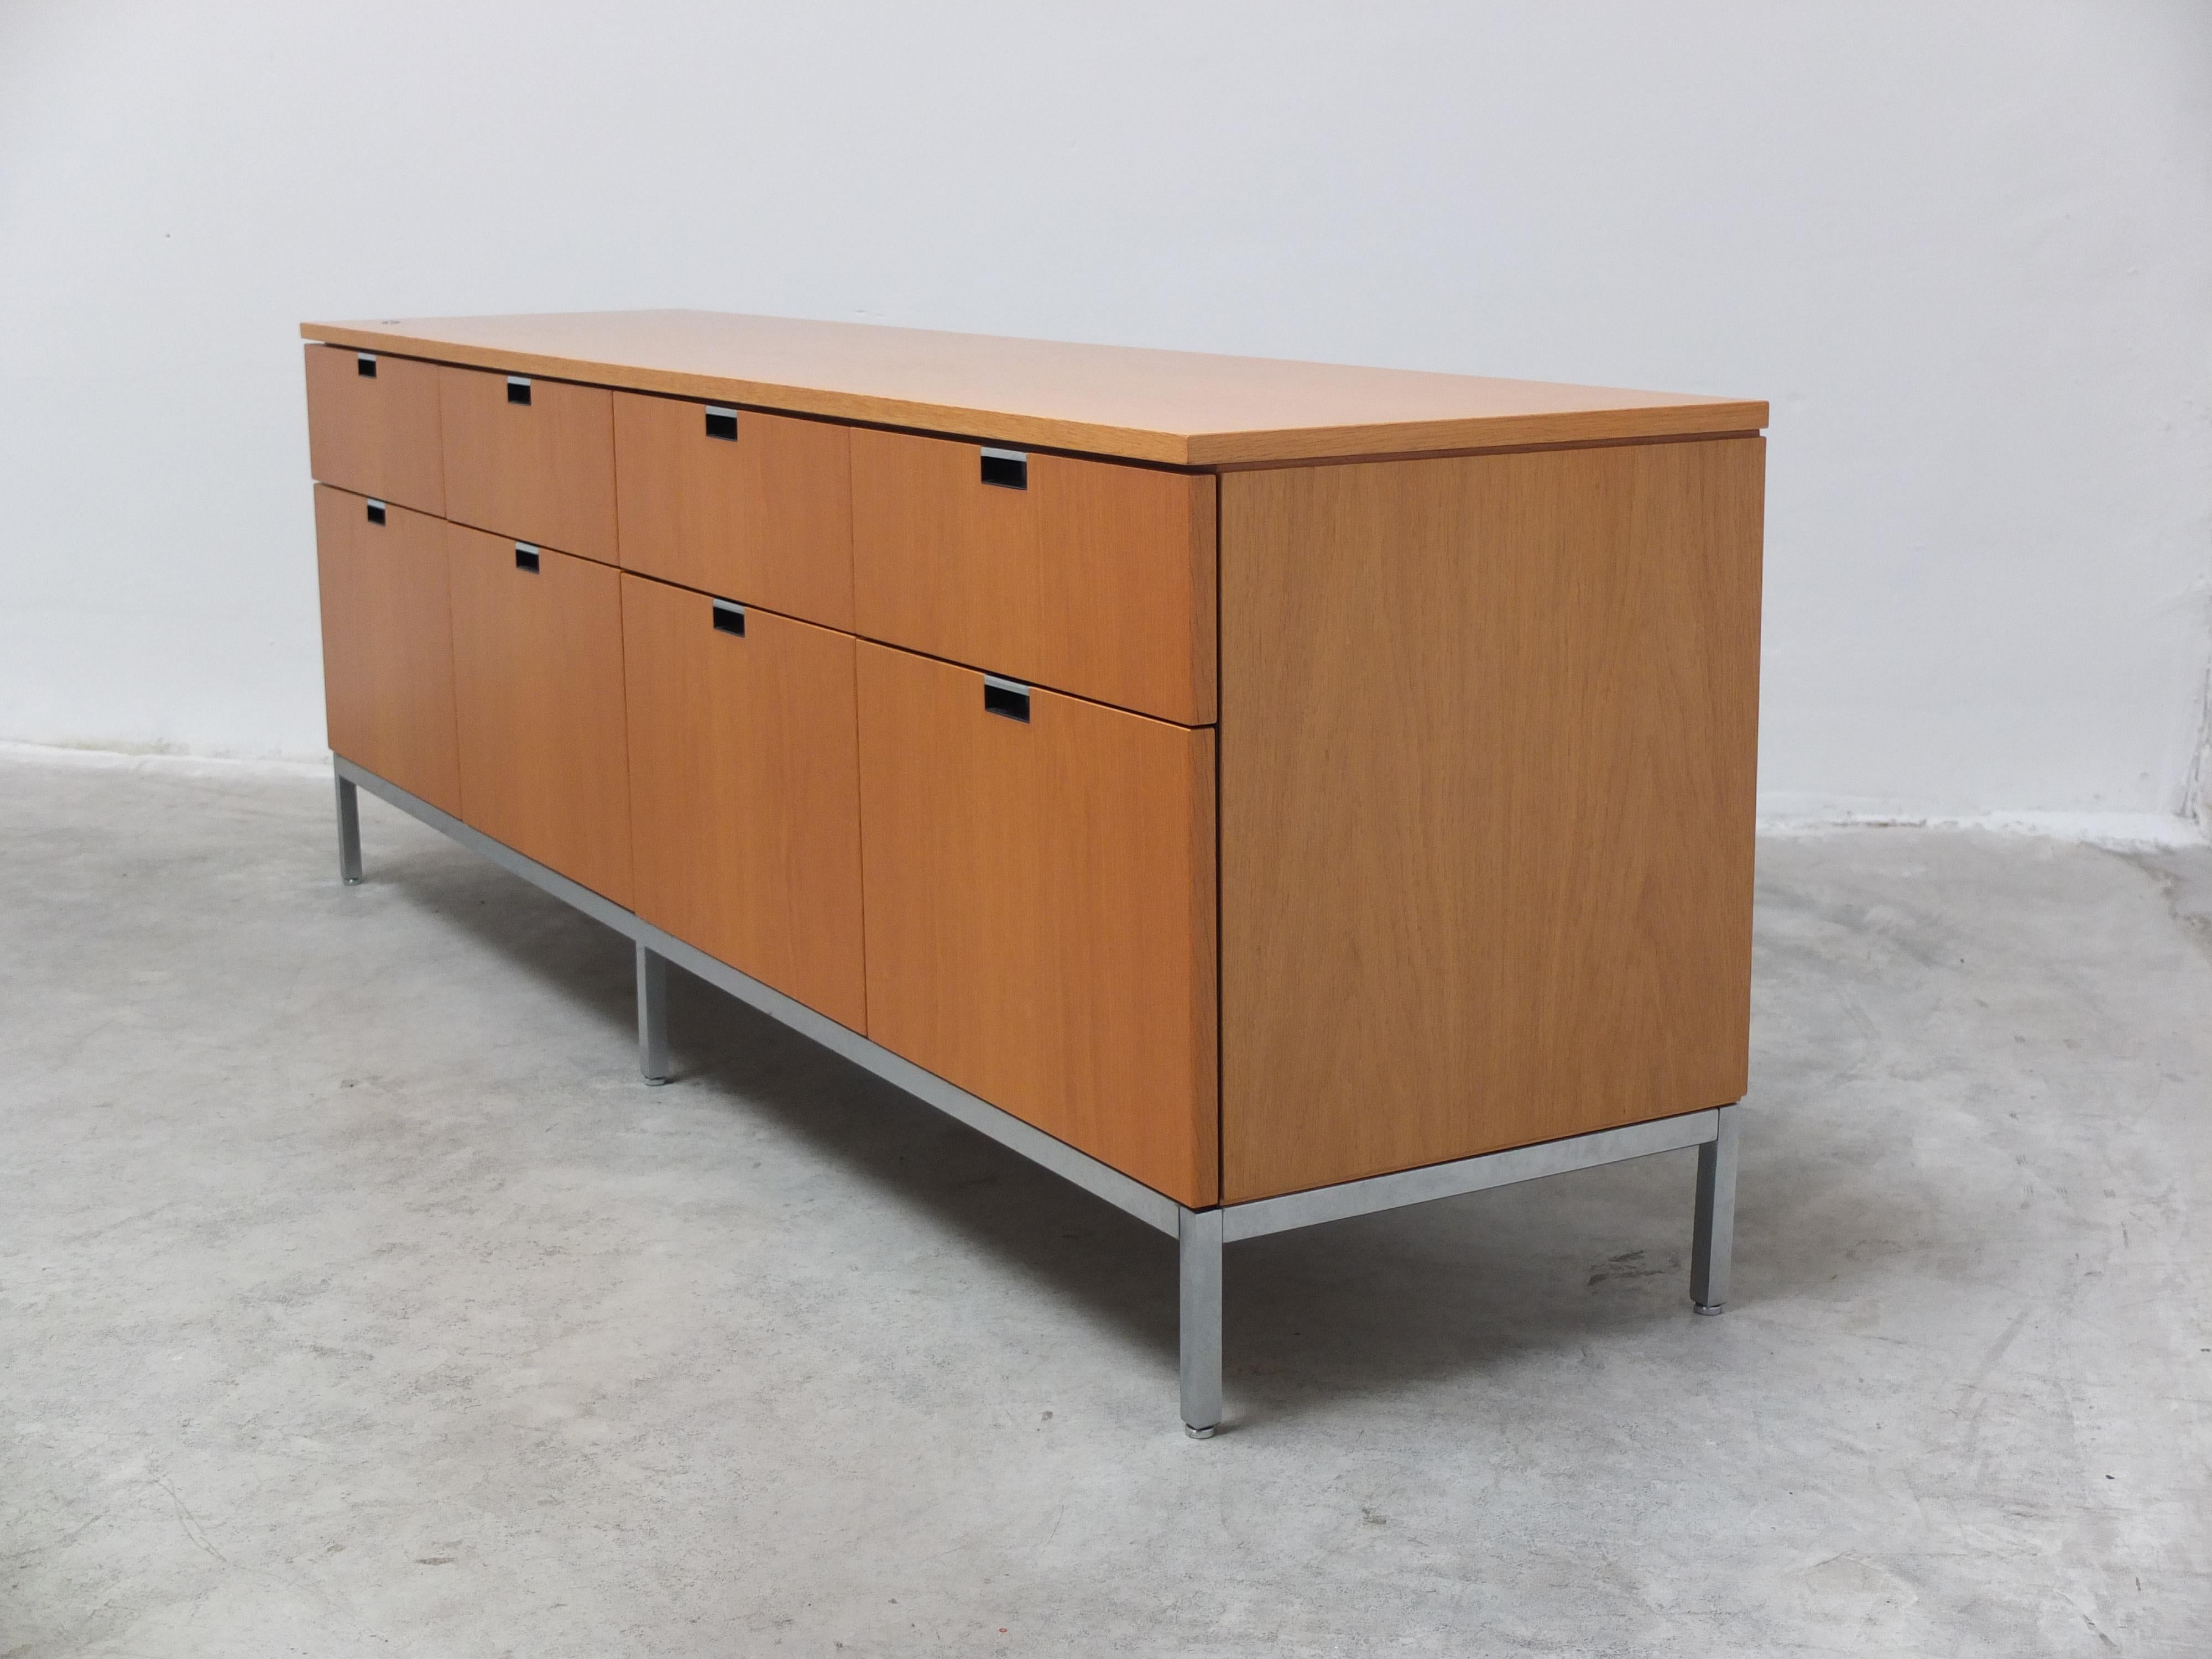 20th Century Freestanding 8-Drawer Credenza by Florence Knoll for Knoll, 1961 For Sale